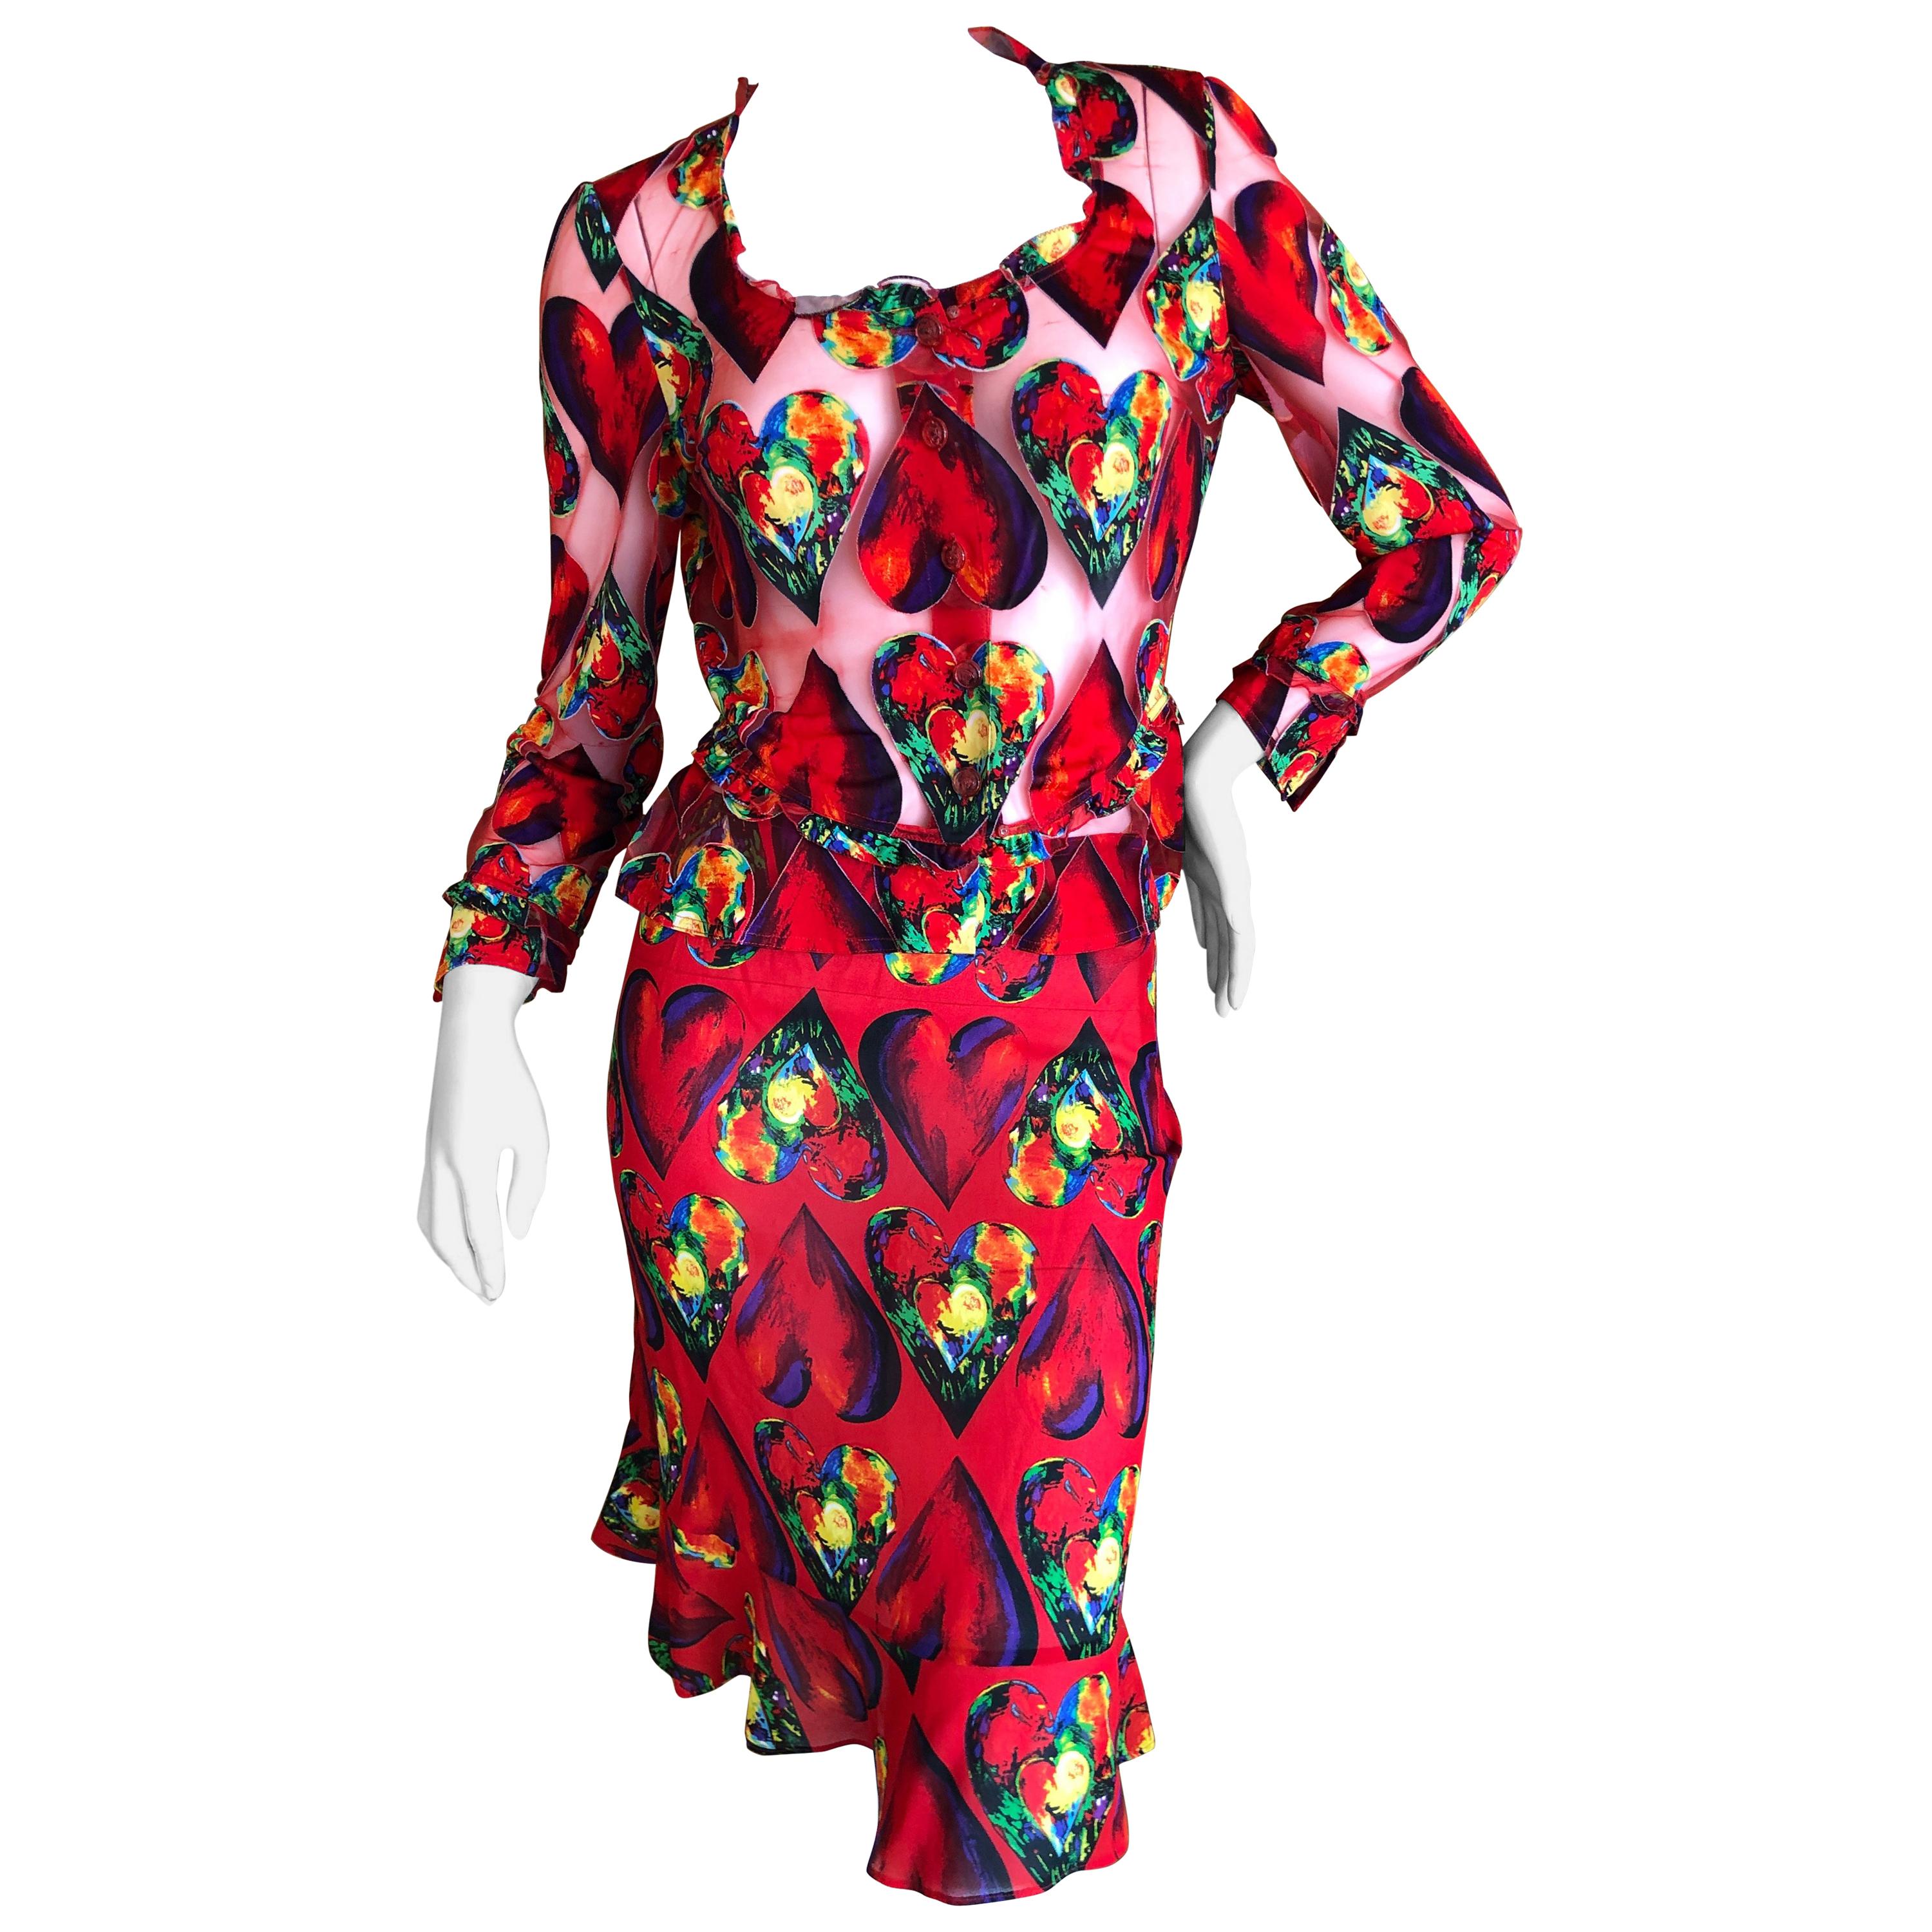 Gianni Versace Couture Spring 1997 Jim Dine Heart Print Sheer Skirt Suit For Sale